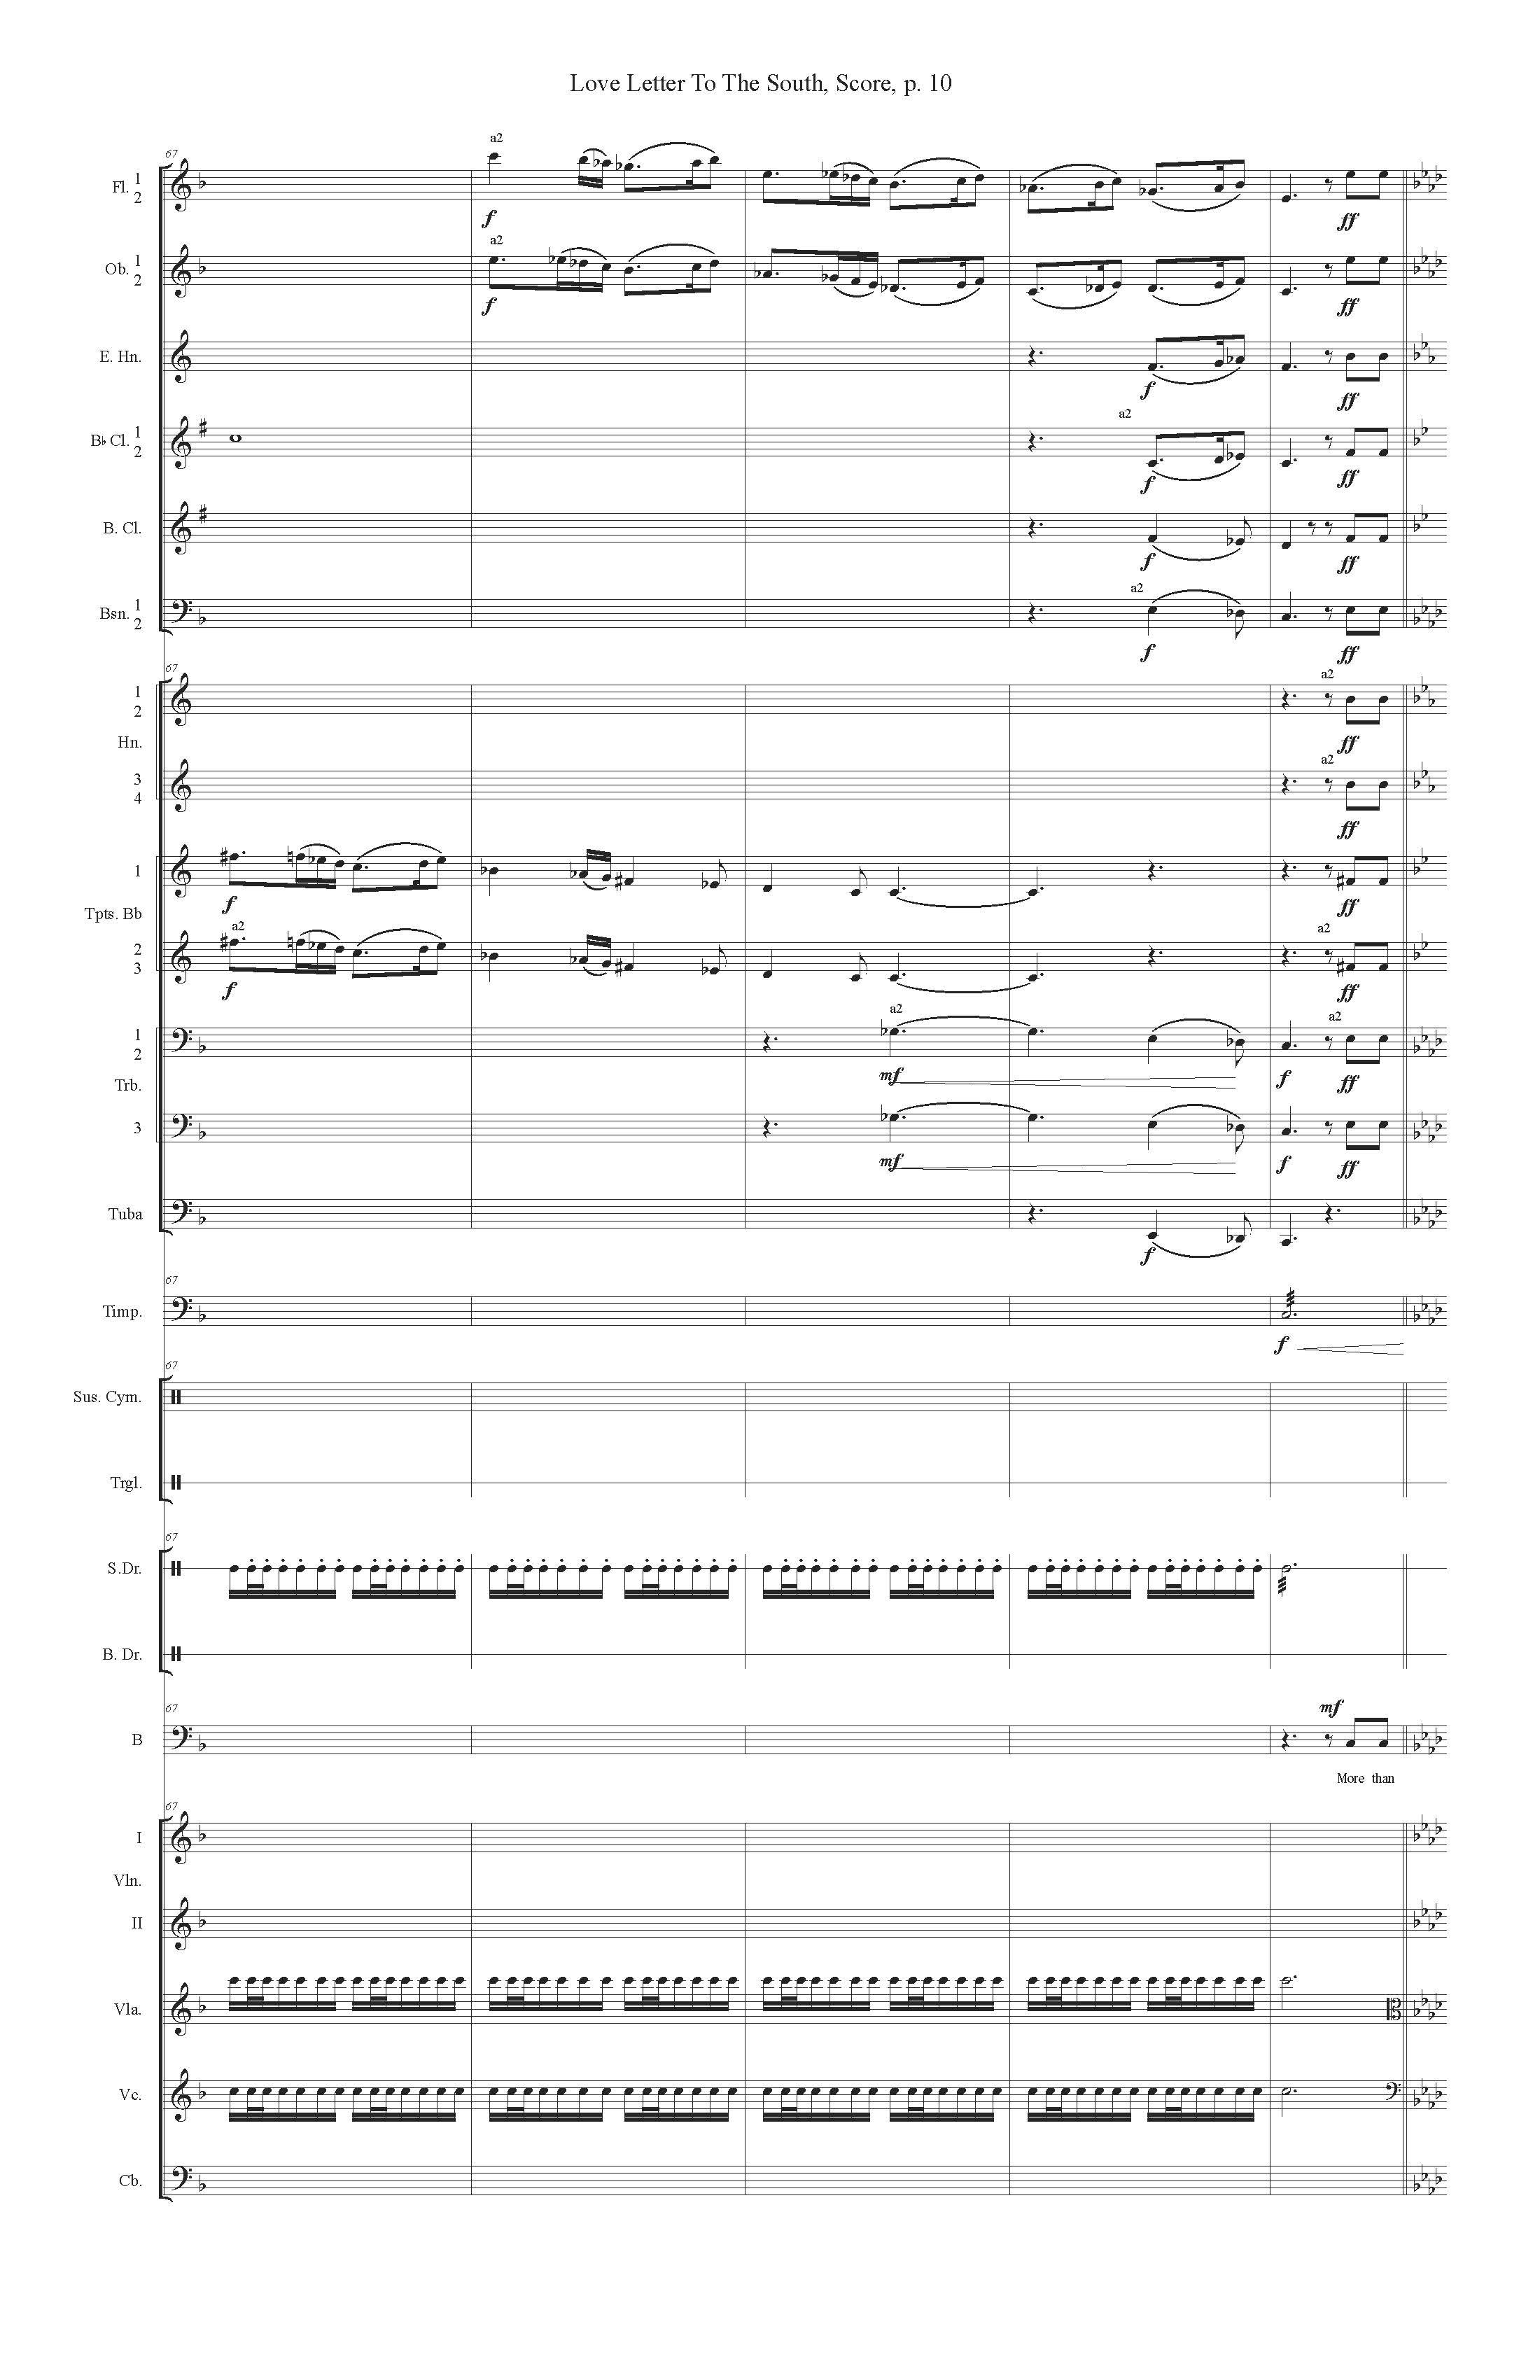 LOVE LETTER TO THE SOUTH ORCH - Score_Page_10.jpg